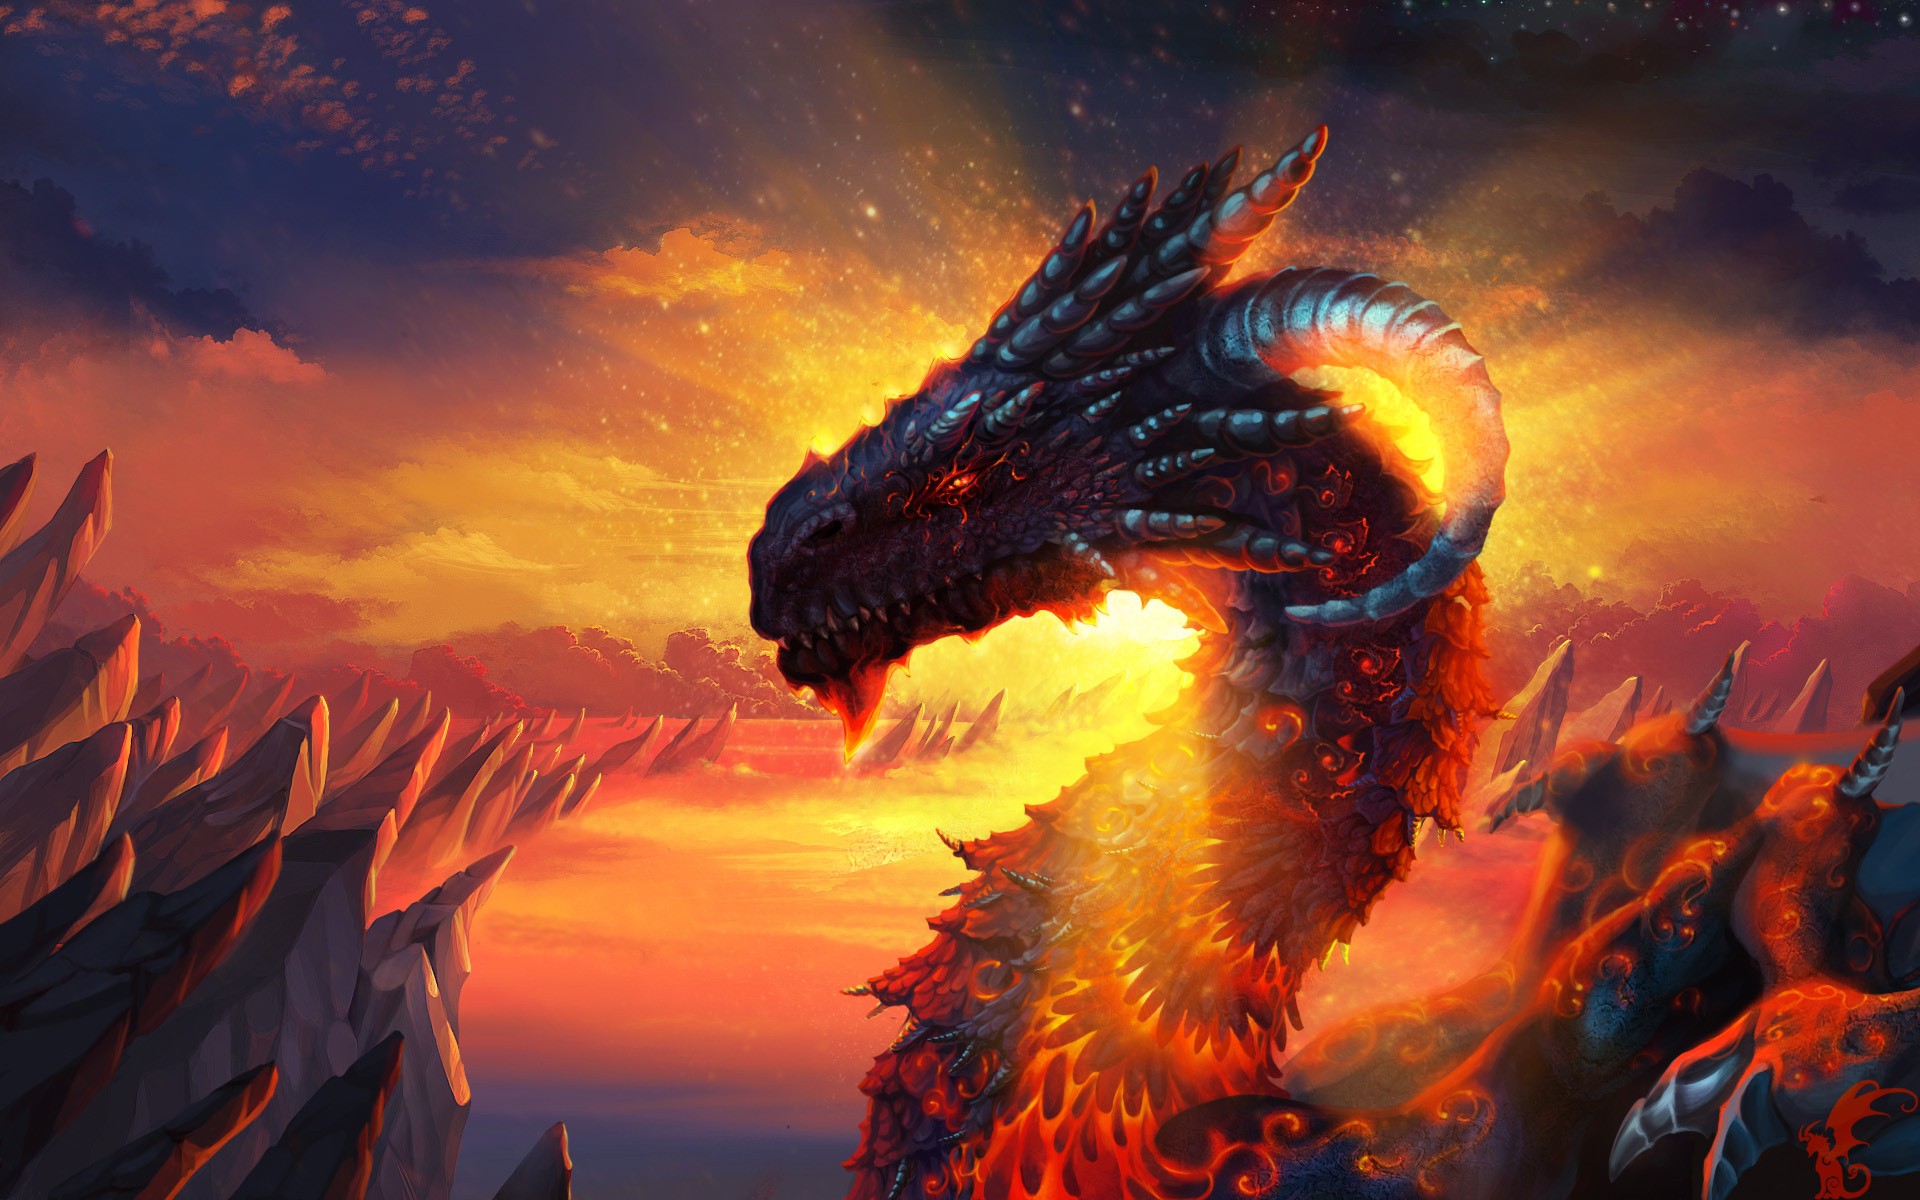 Epic Dragon Submited Image